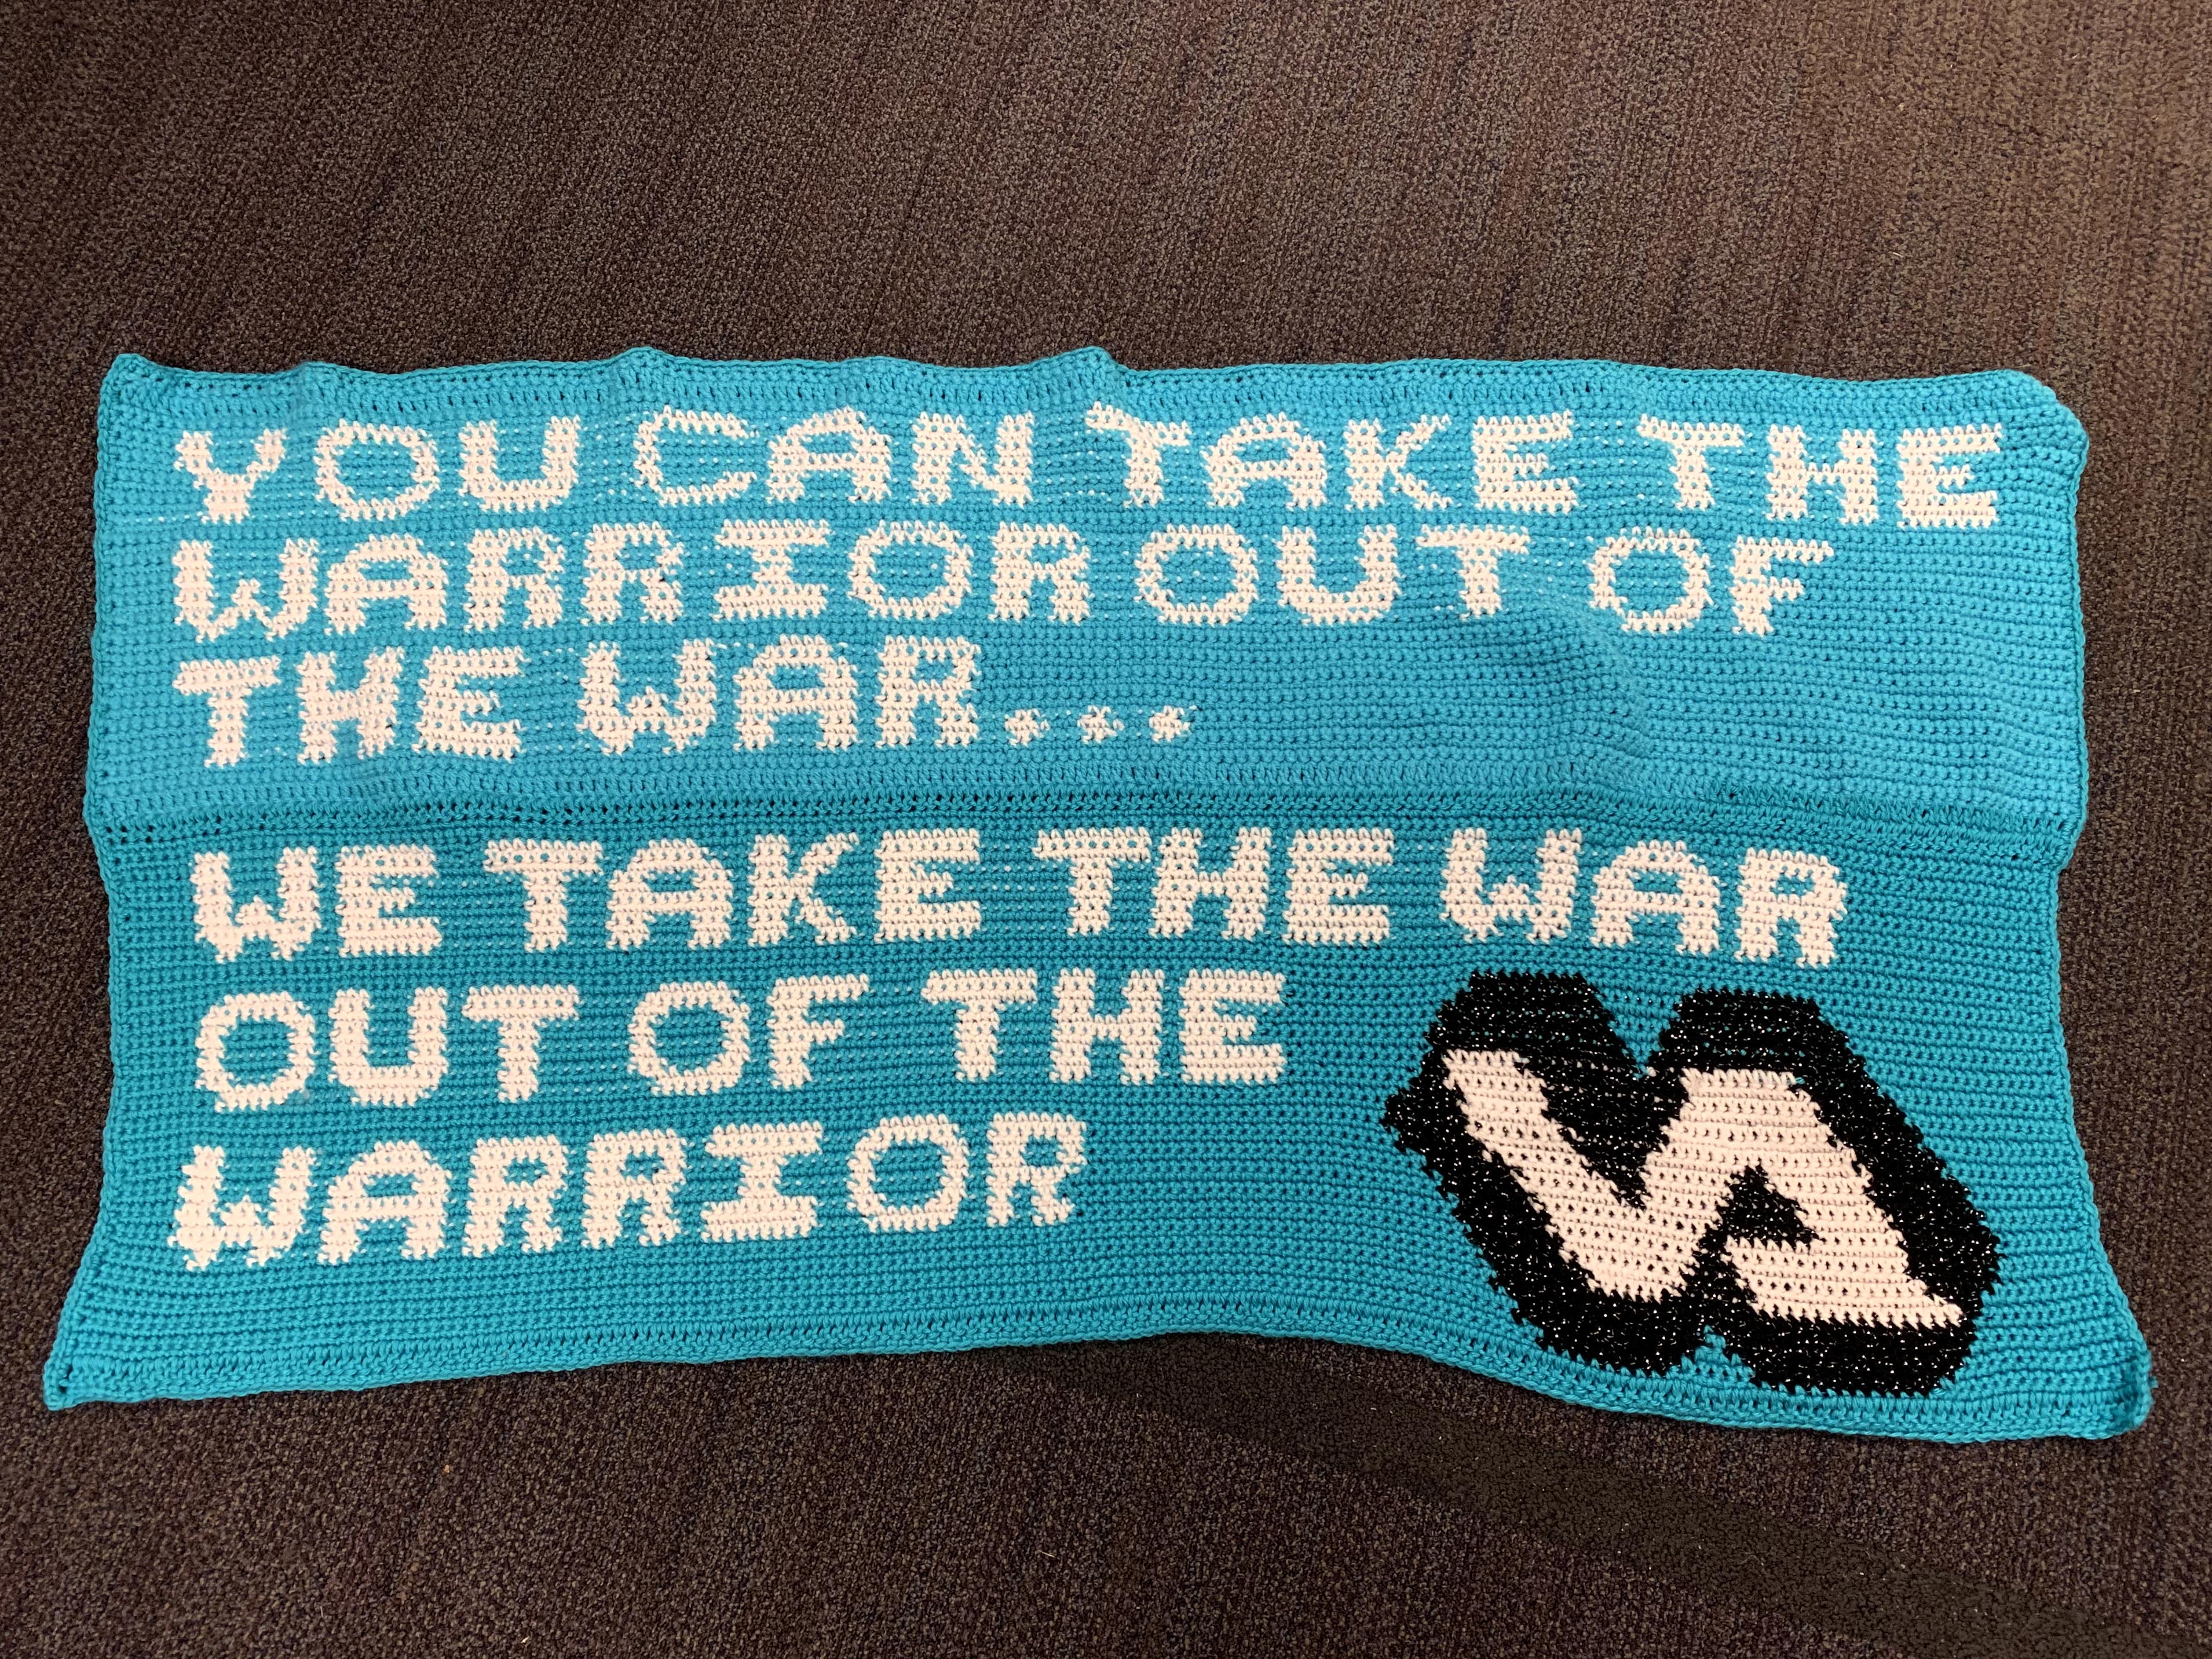 Banner with words "You can take the warrior out of the war...we take the war out of the warrior" with the VA logo.